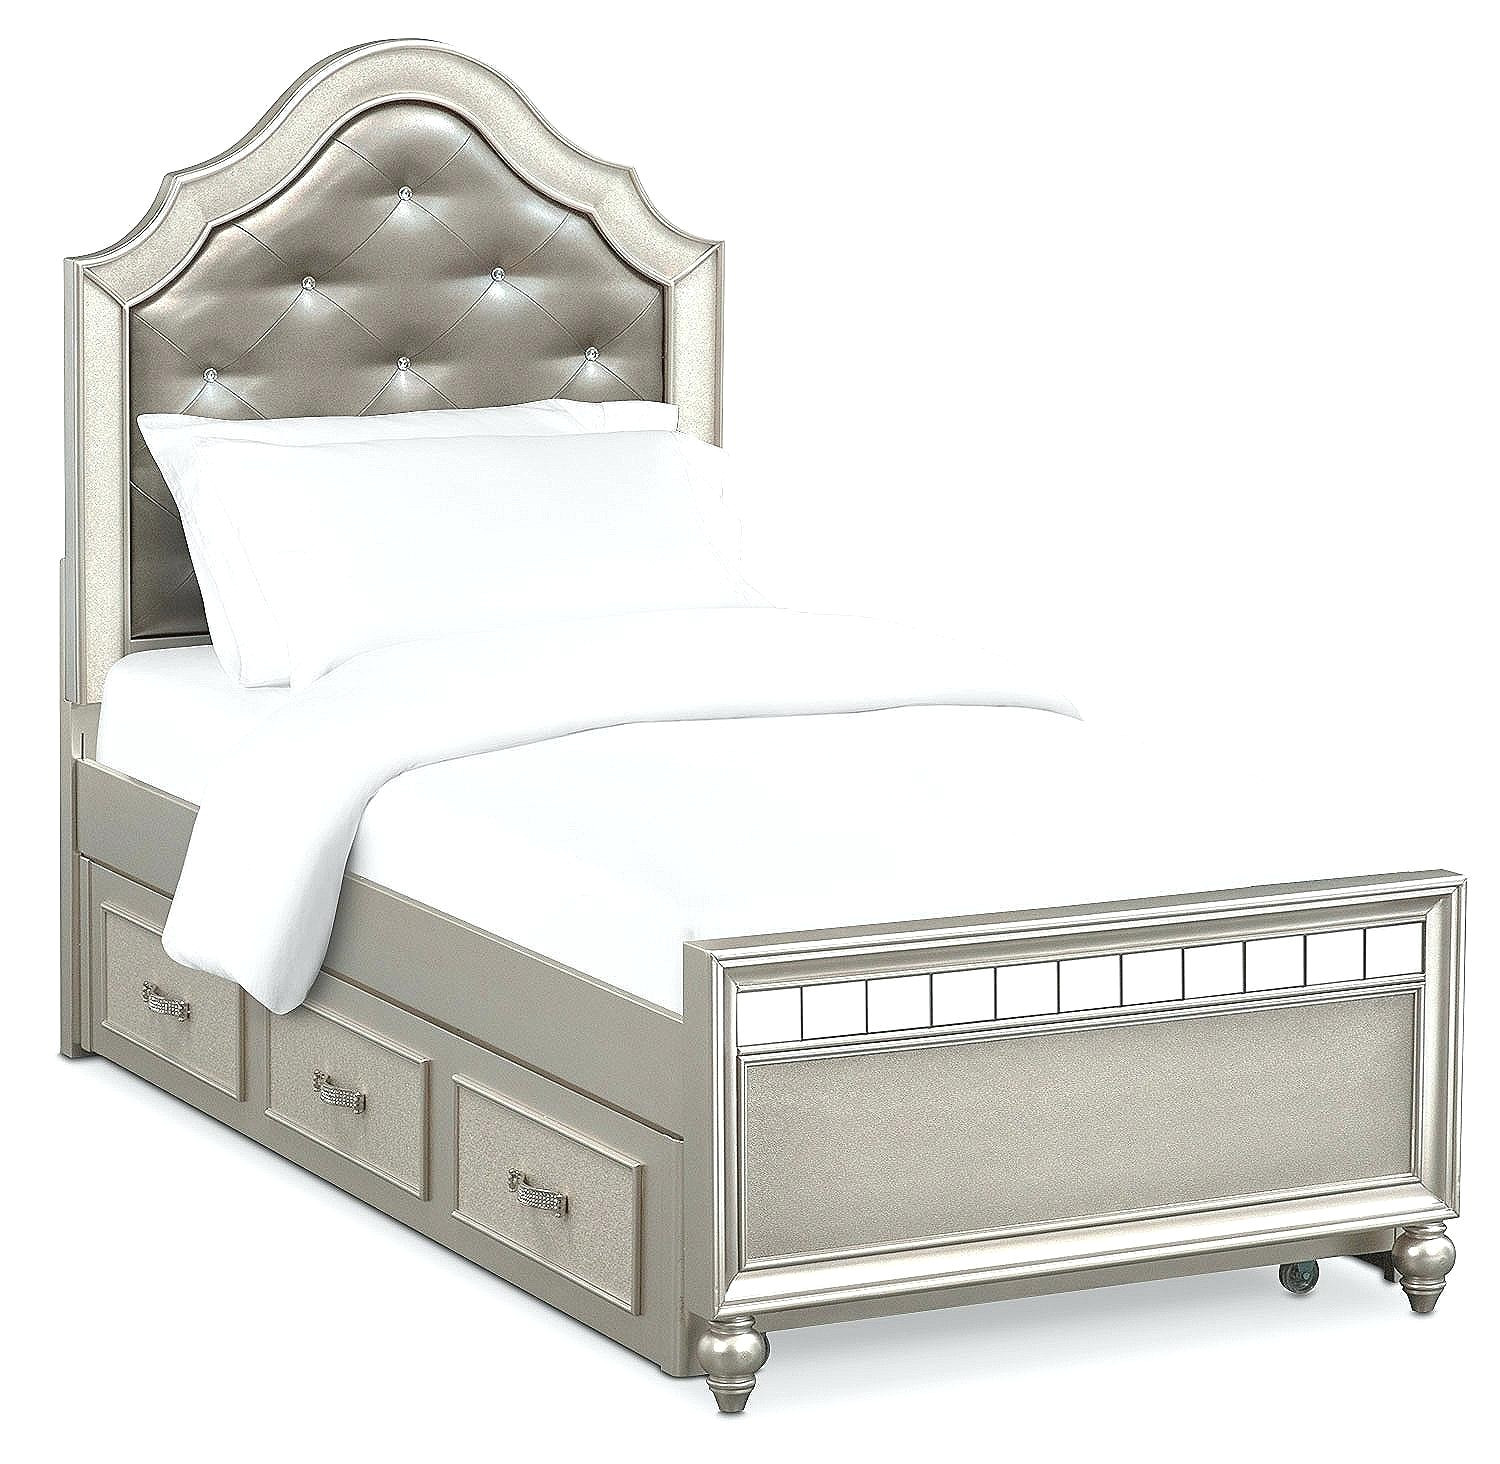 twin size metal bed frame fresh bed frames appealing cm twin dimensions vs full frame feet